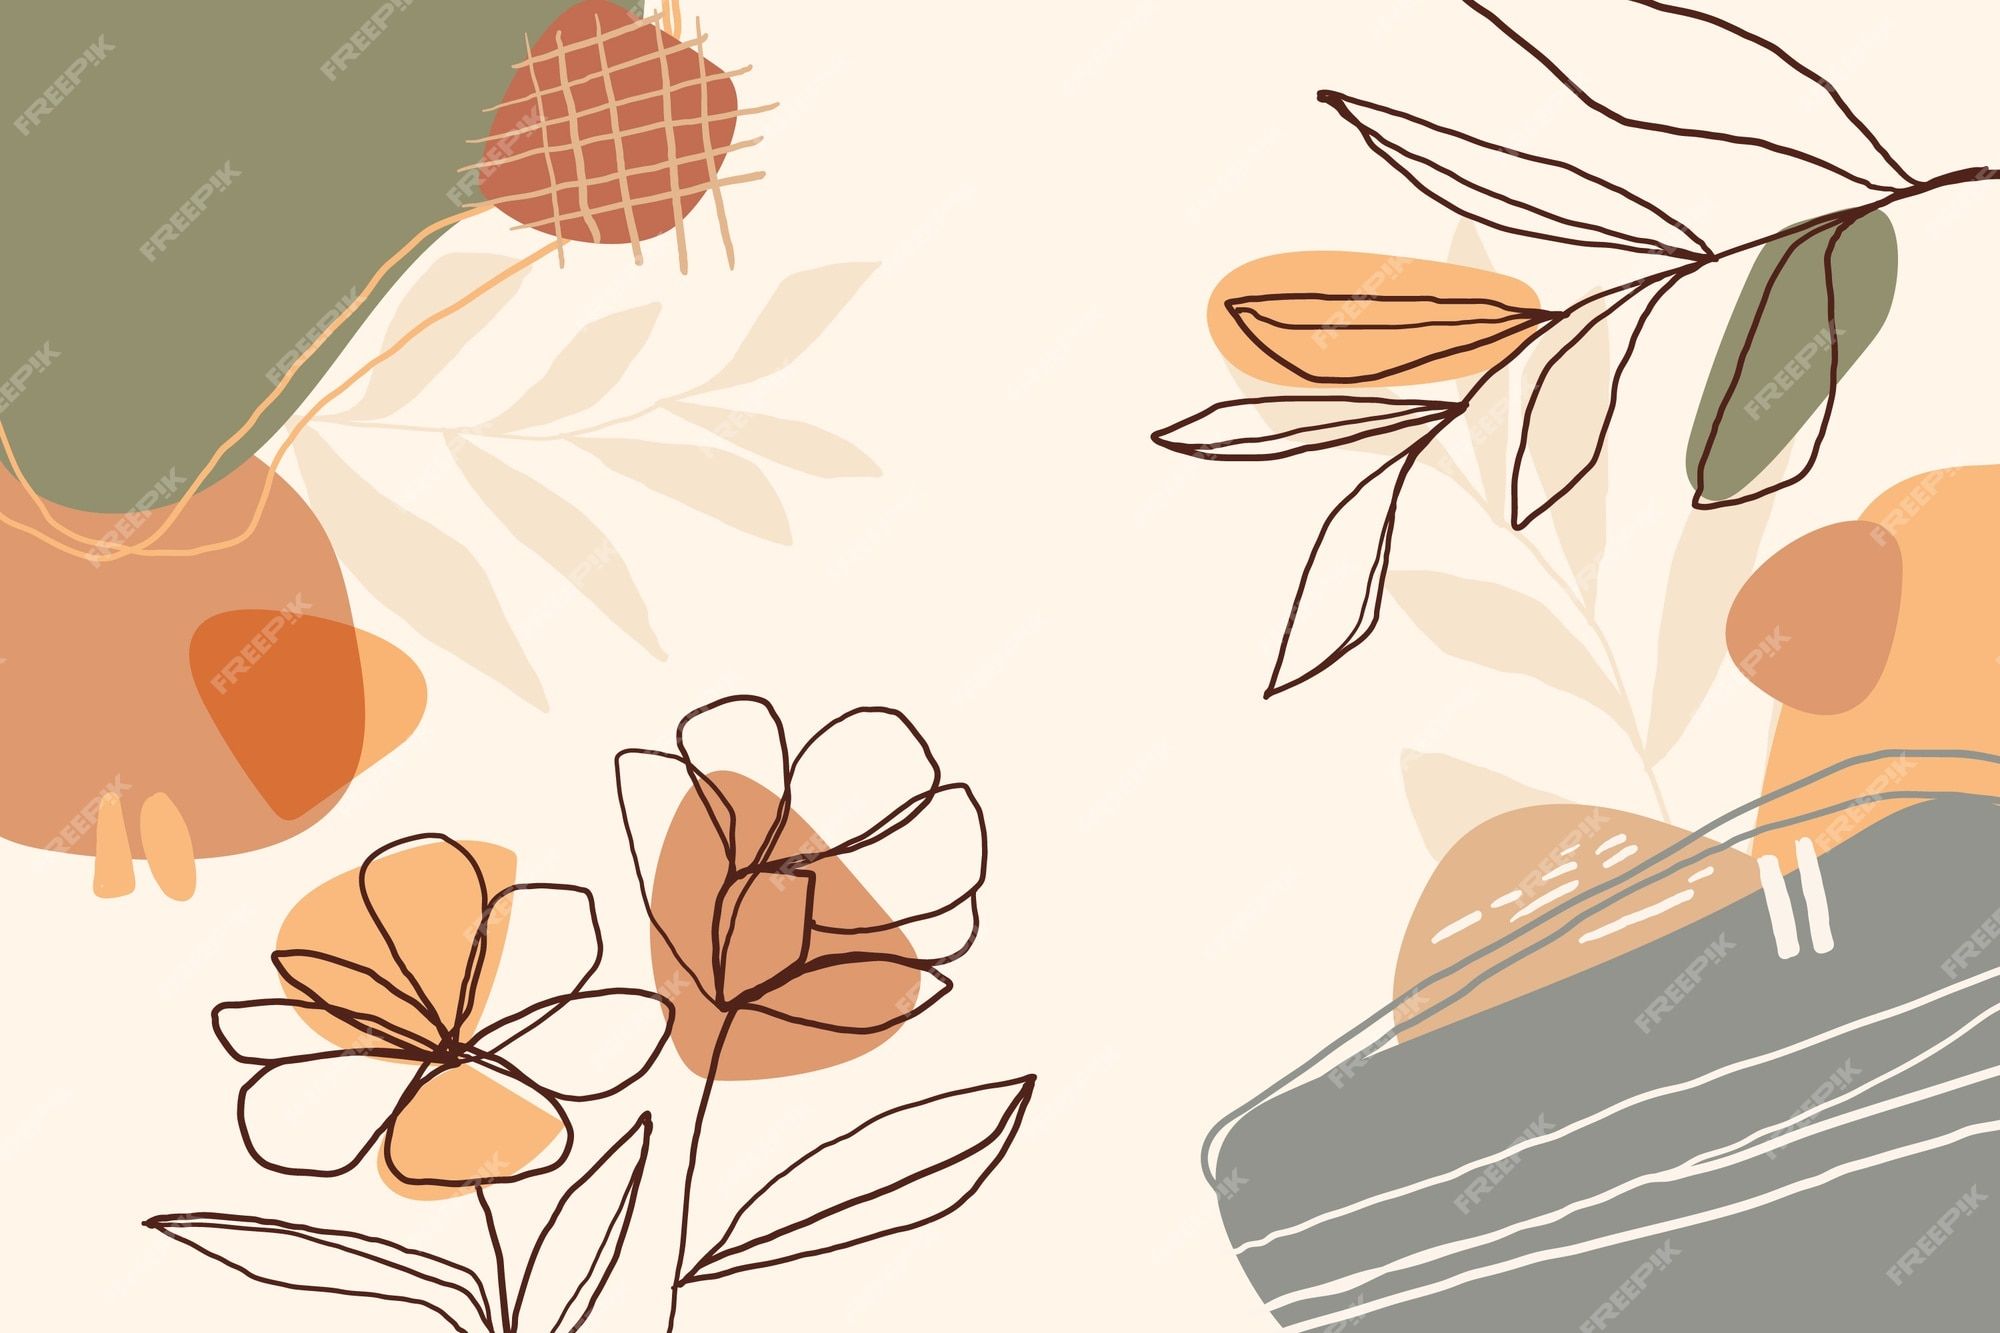 An abstract floral background with orange, brown, and green shapes - Abstract